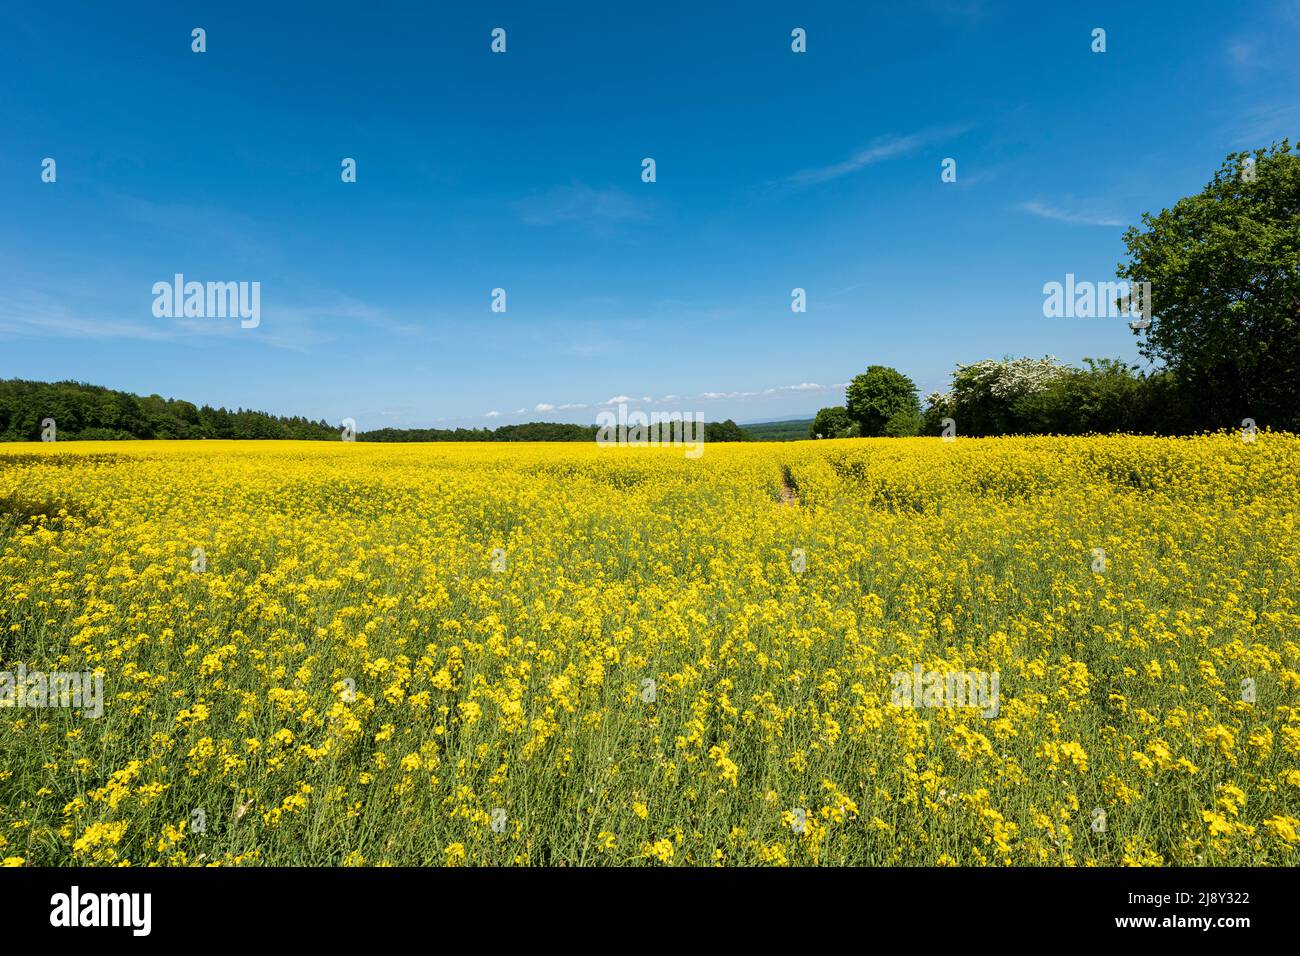 wide angle pick up from a bright yellow rapeseed field with blue sky Stock Photo